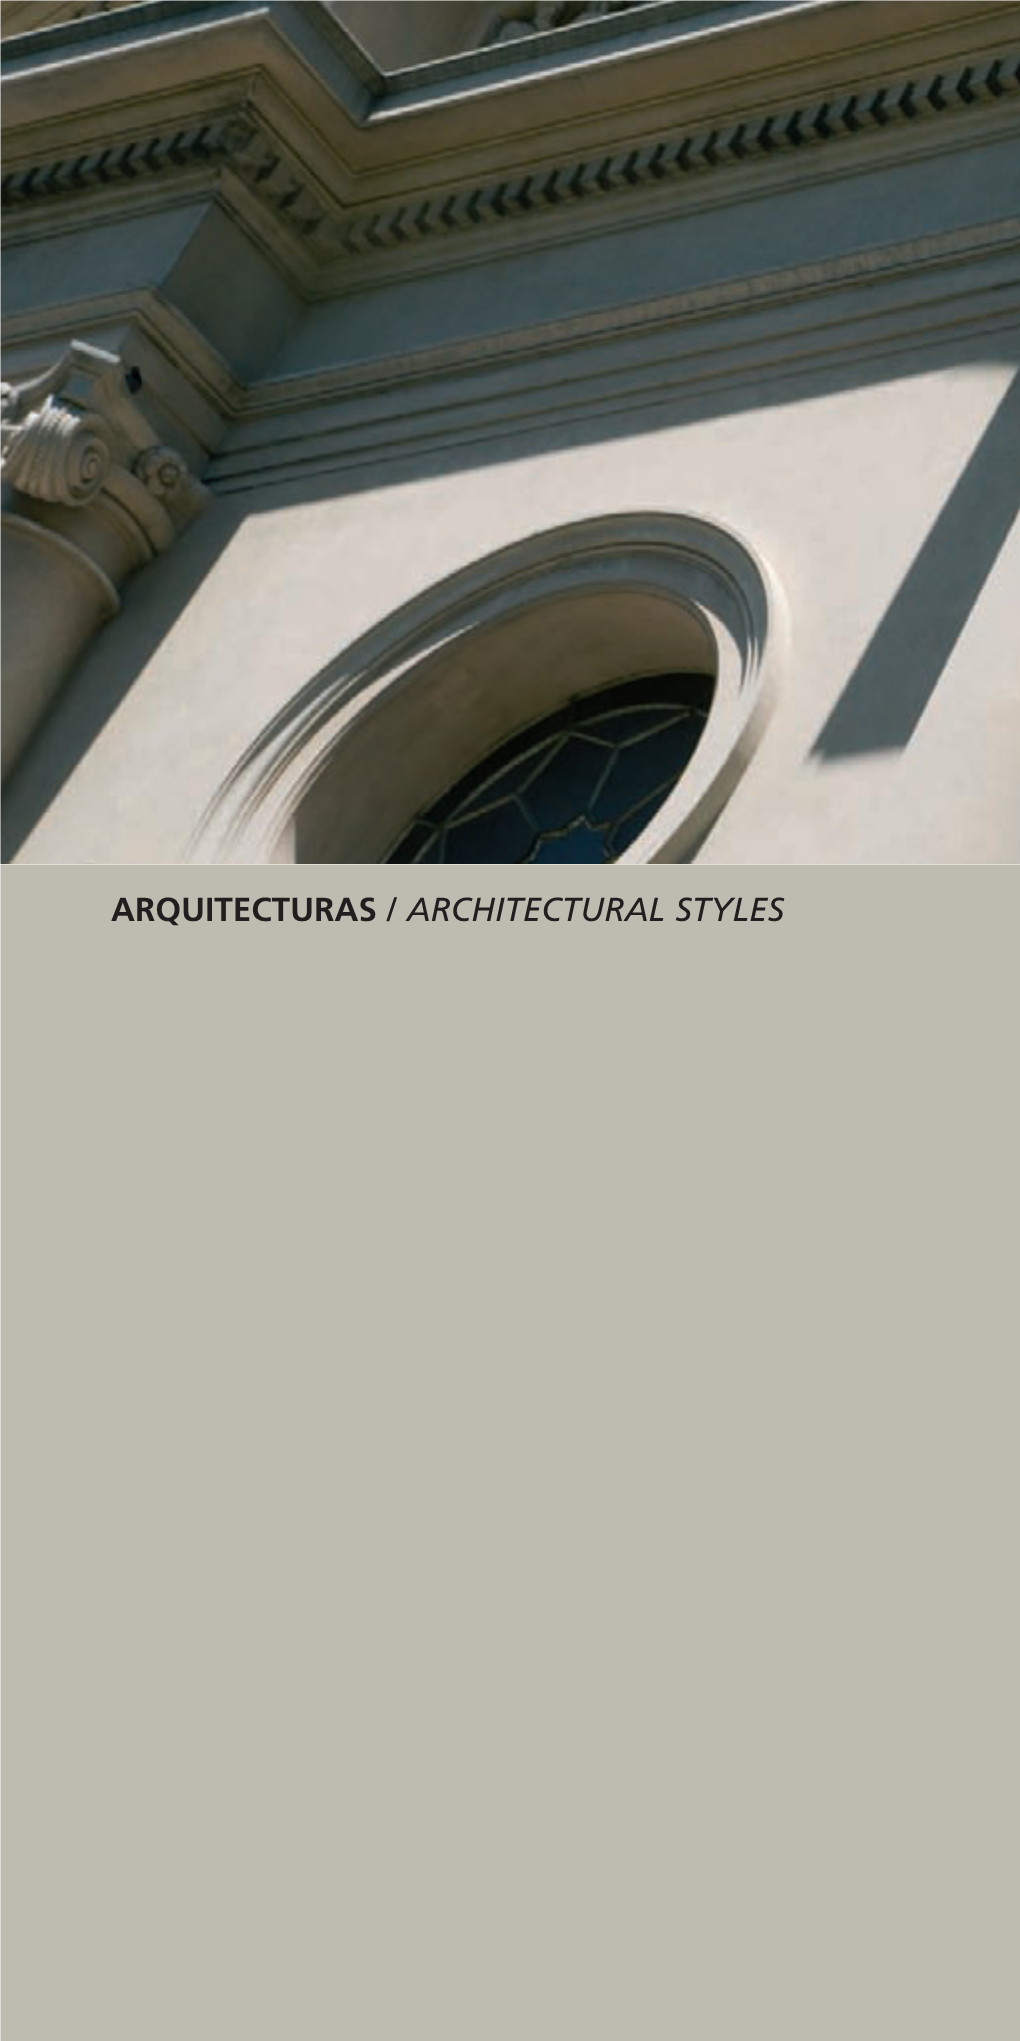 Arquitecturas / Architectural Styles